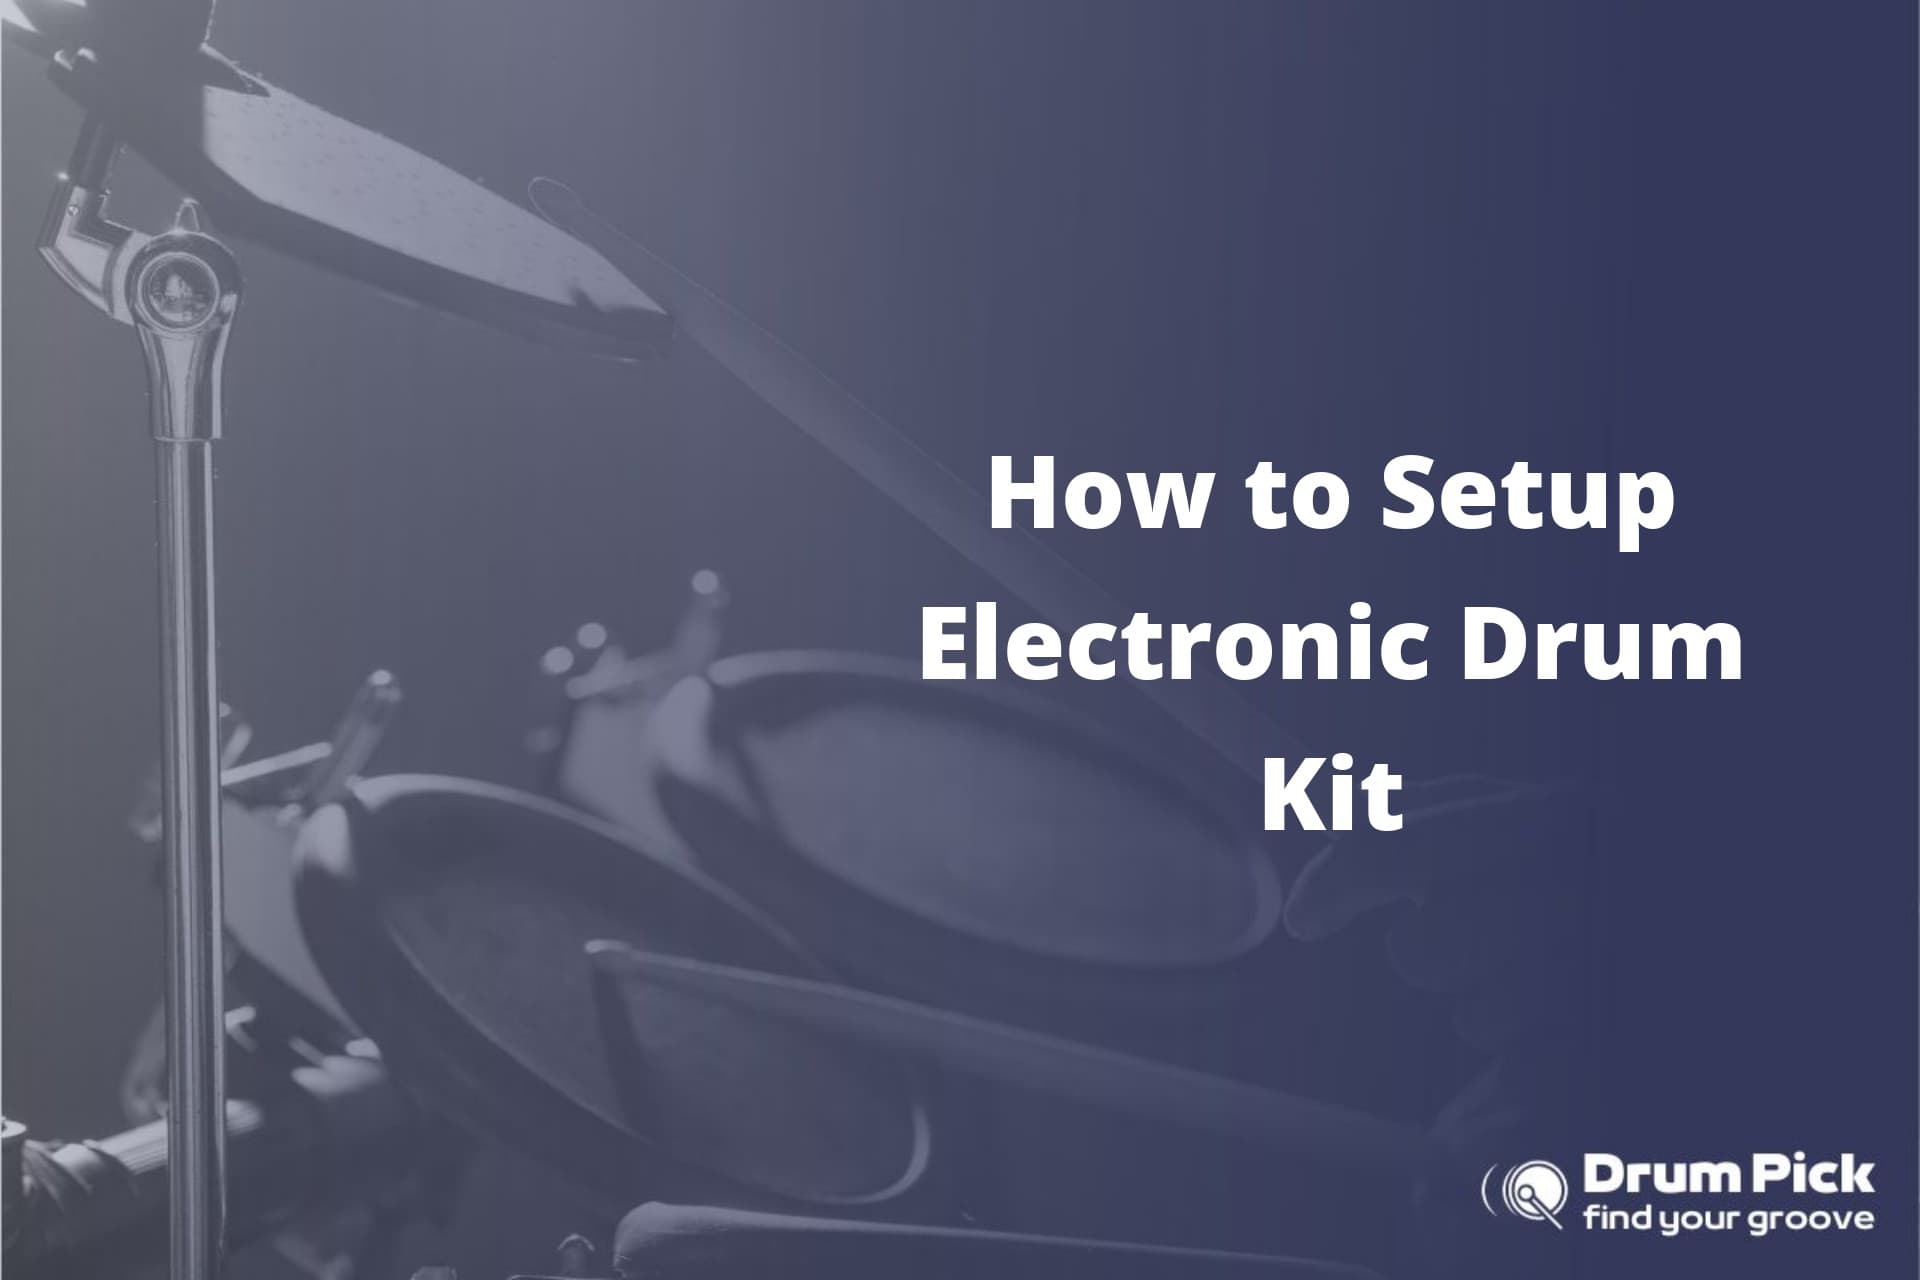 How to Setup Electronic Drum Kit